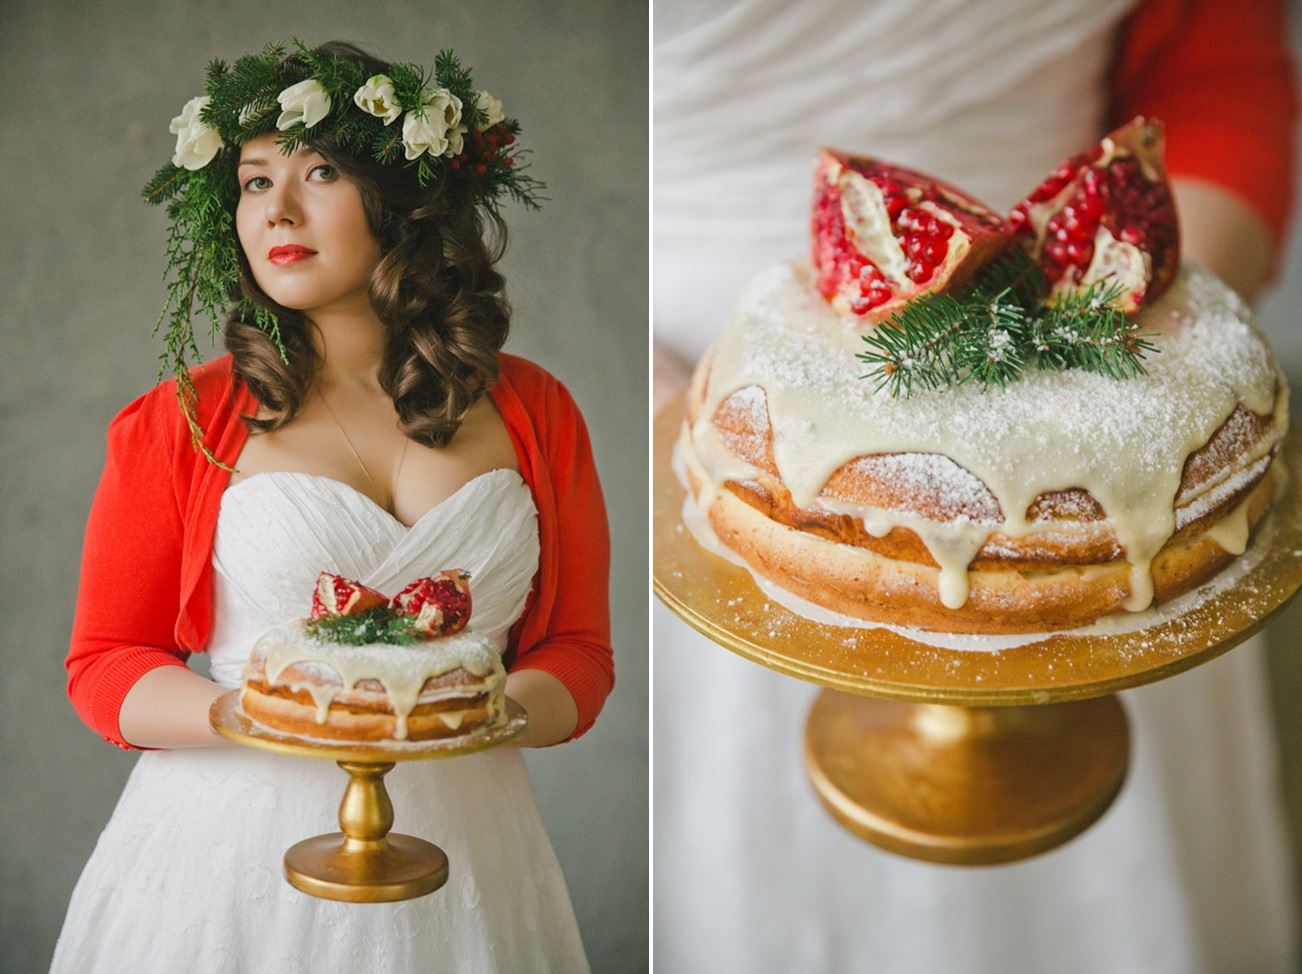 Christmas Wedding Cake - A Cosy Winter Wedding Inspiration Shoot in Red, Green & White from WarmPhoto